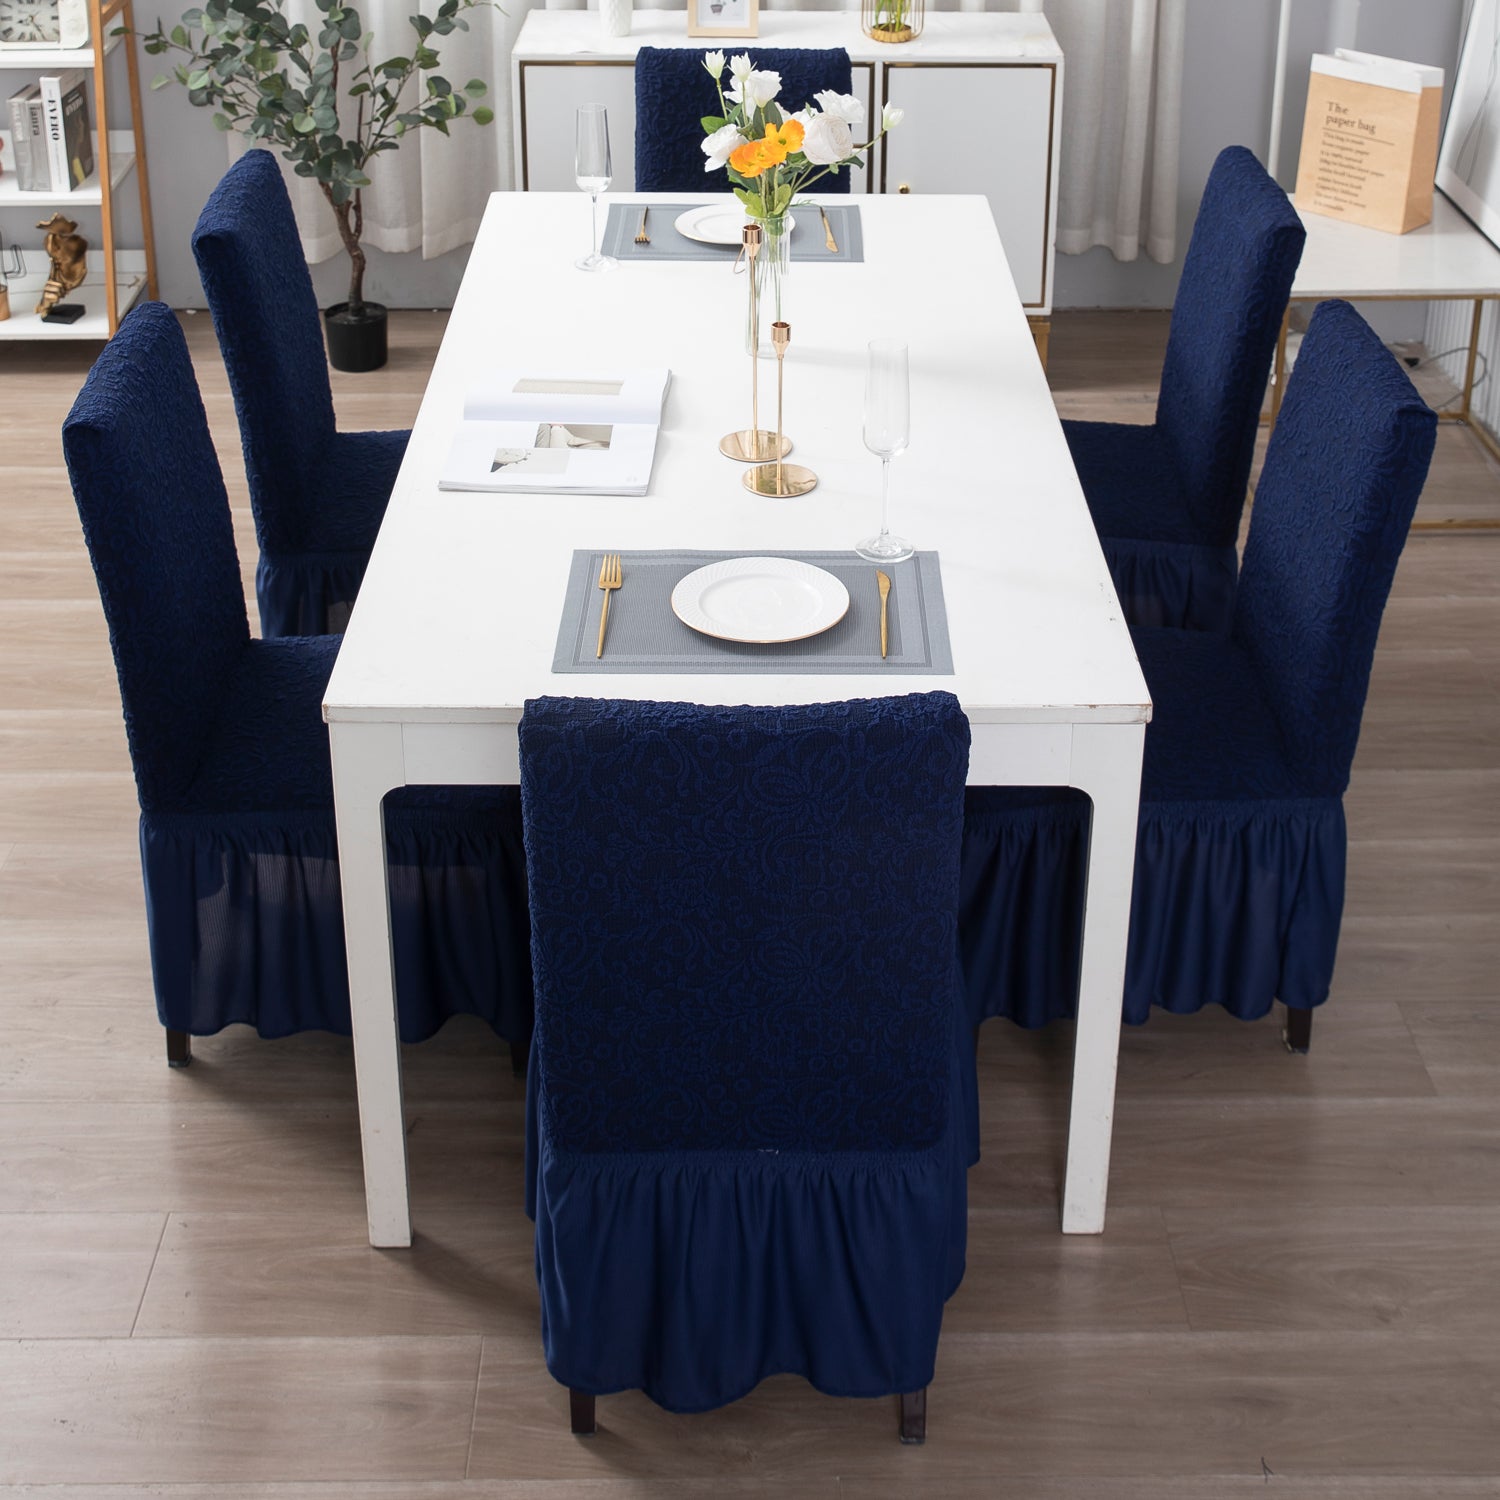 Elastic Stretchable Designer Woven Jacquard Dining Chair Cover with Frill, Navy Blue